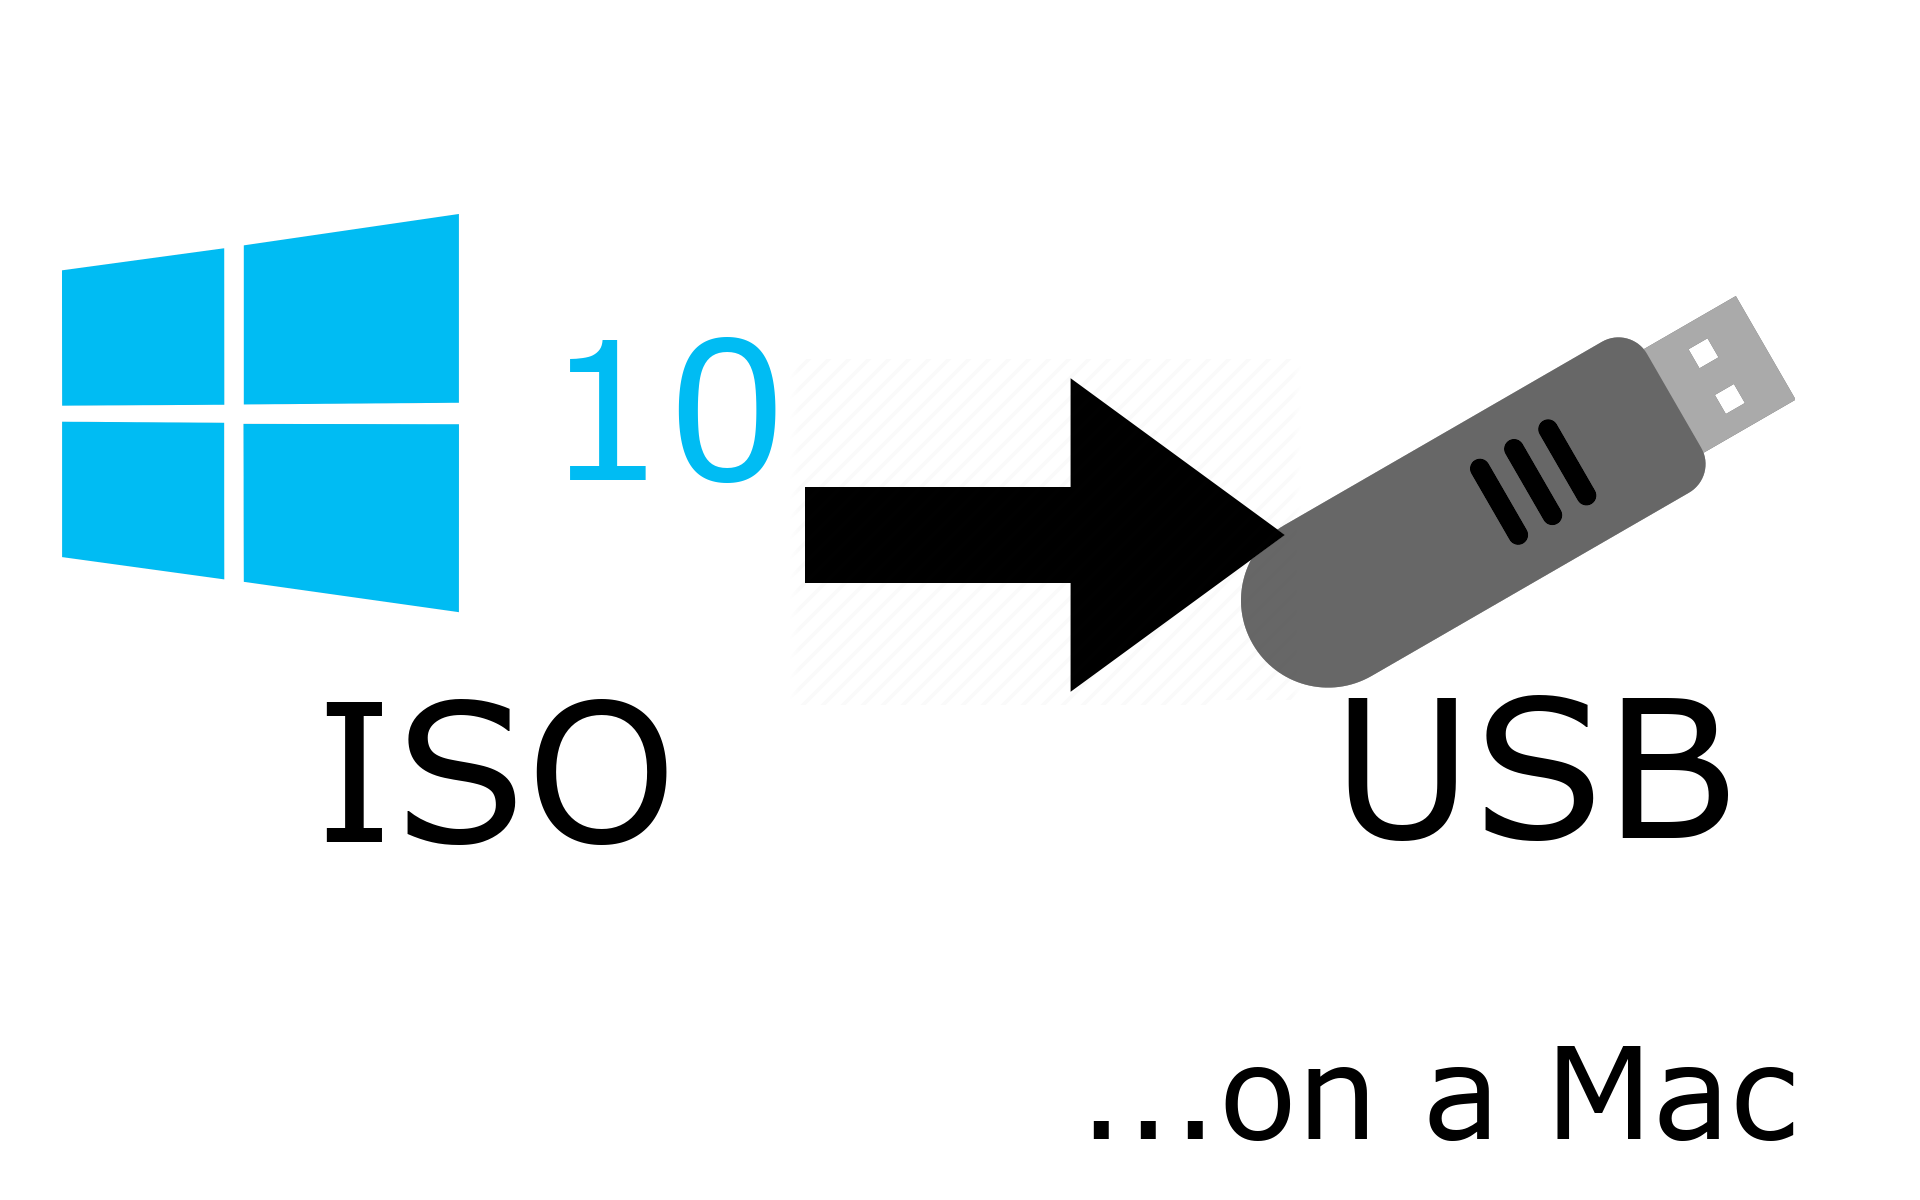 Windows 10 iso image for mac bootcamp